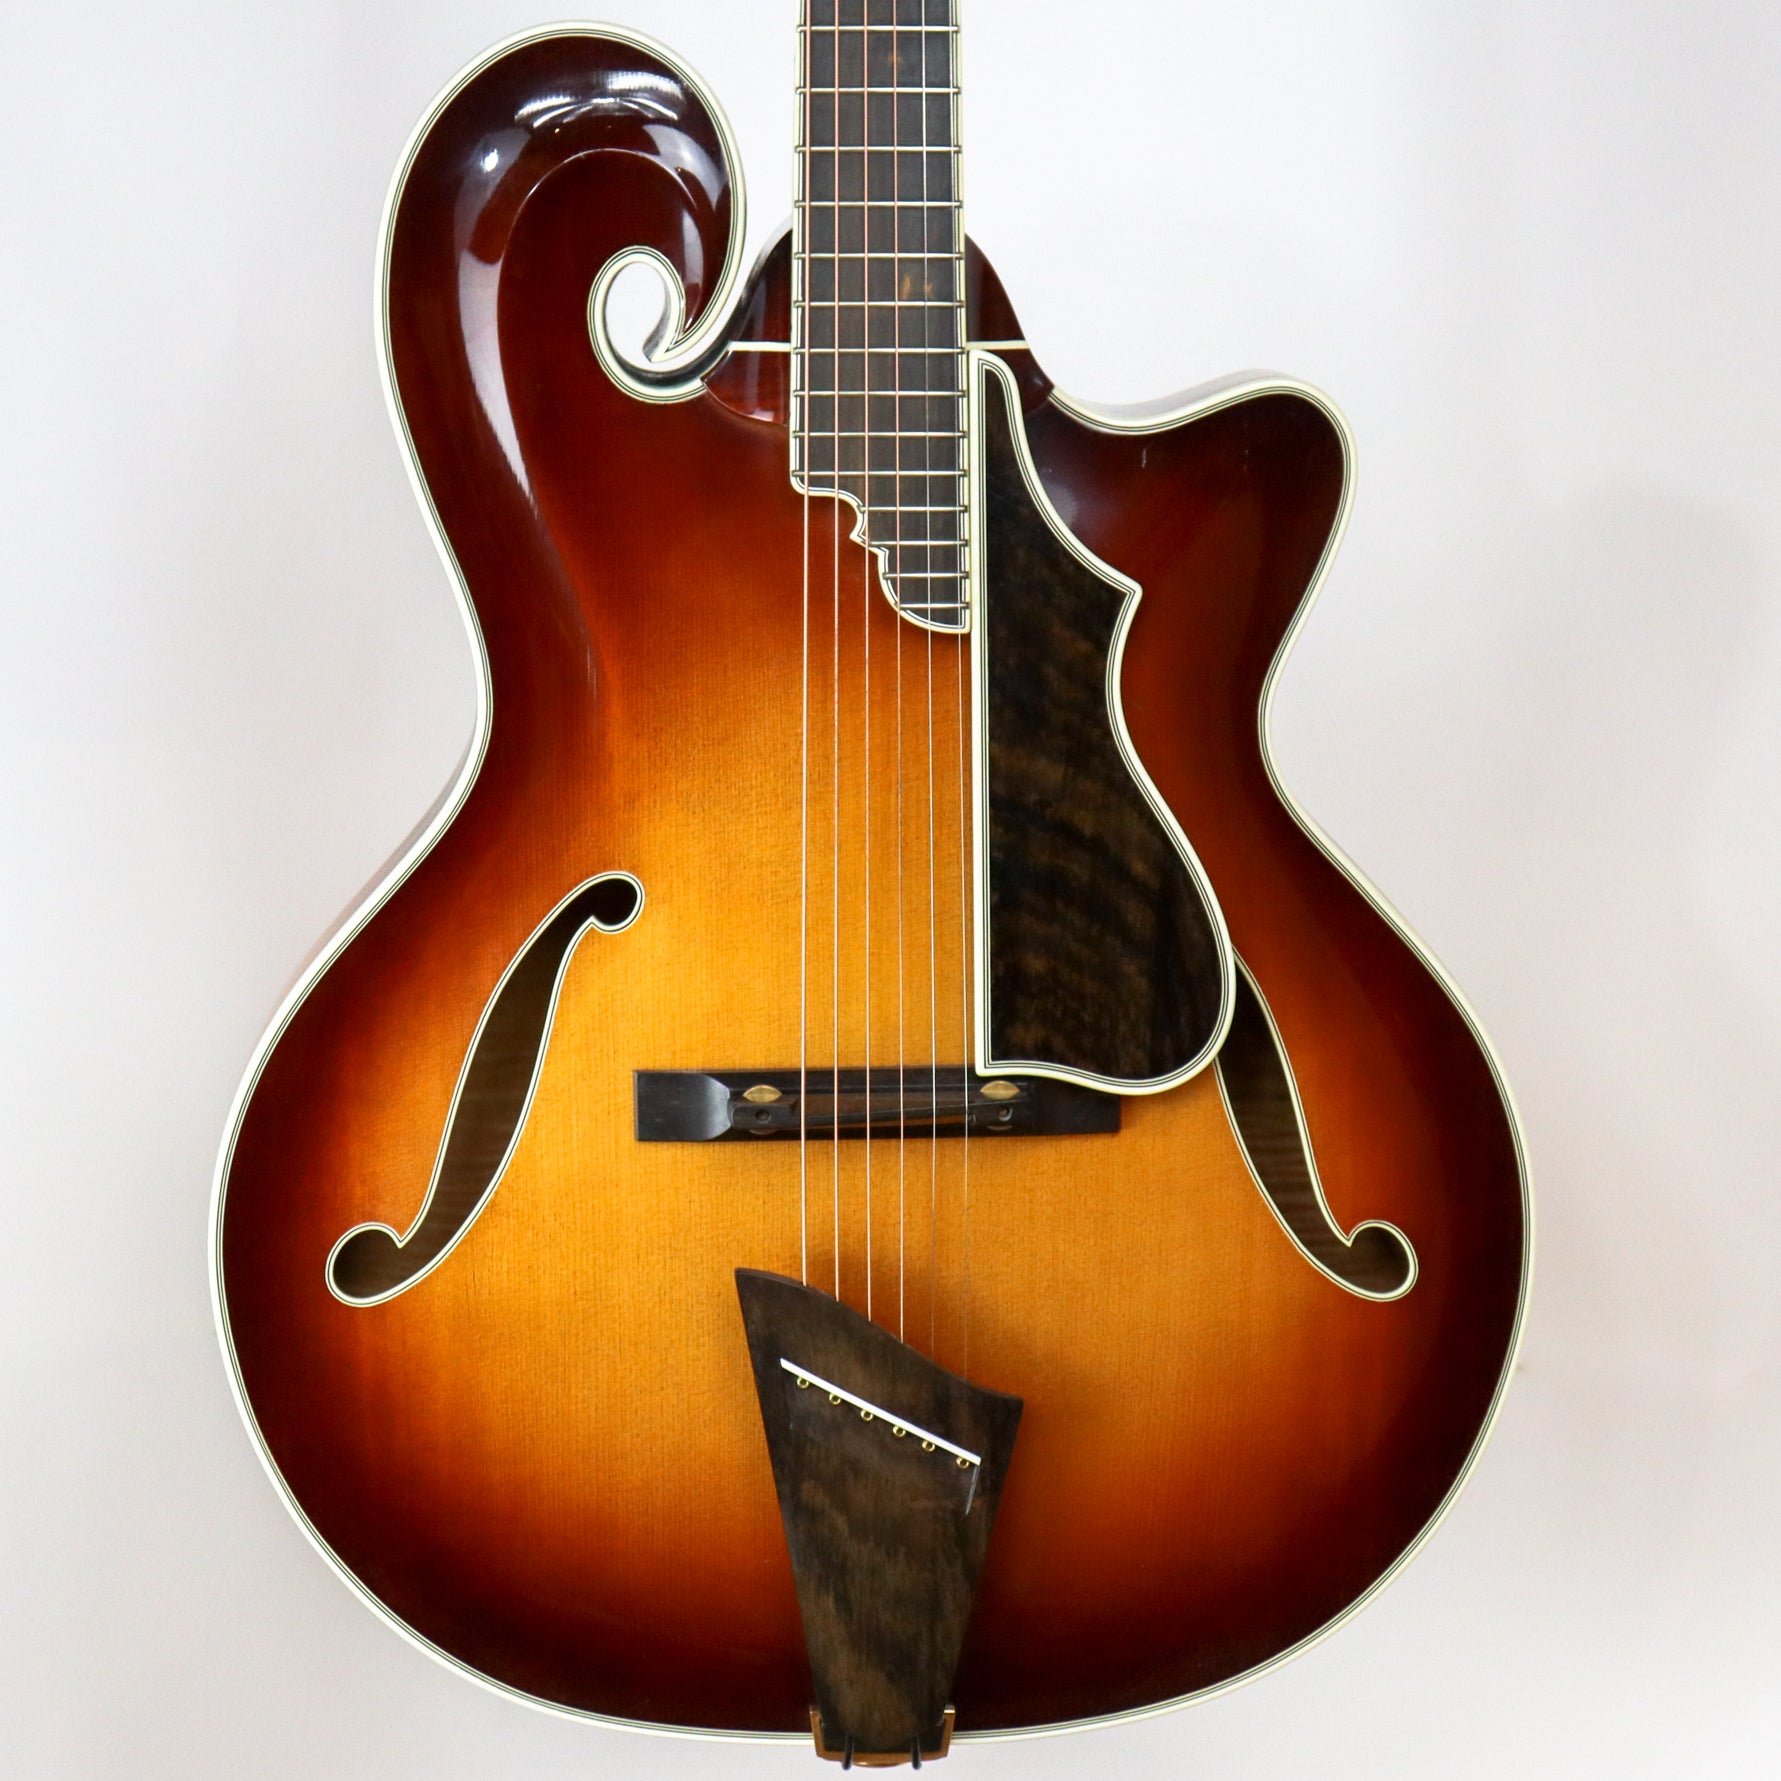 Monteleone 1994 Grand Artist #147 (First One Ever Built)